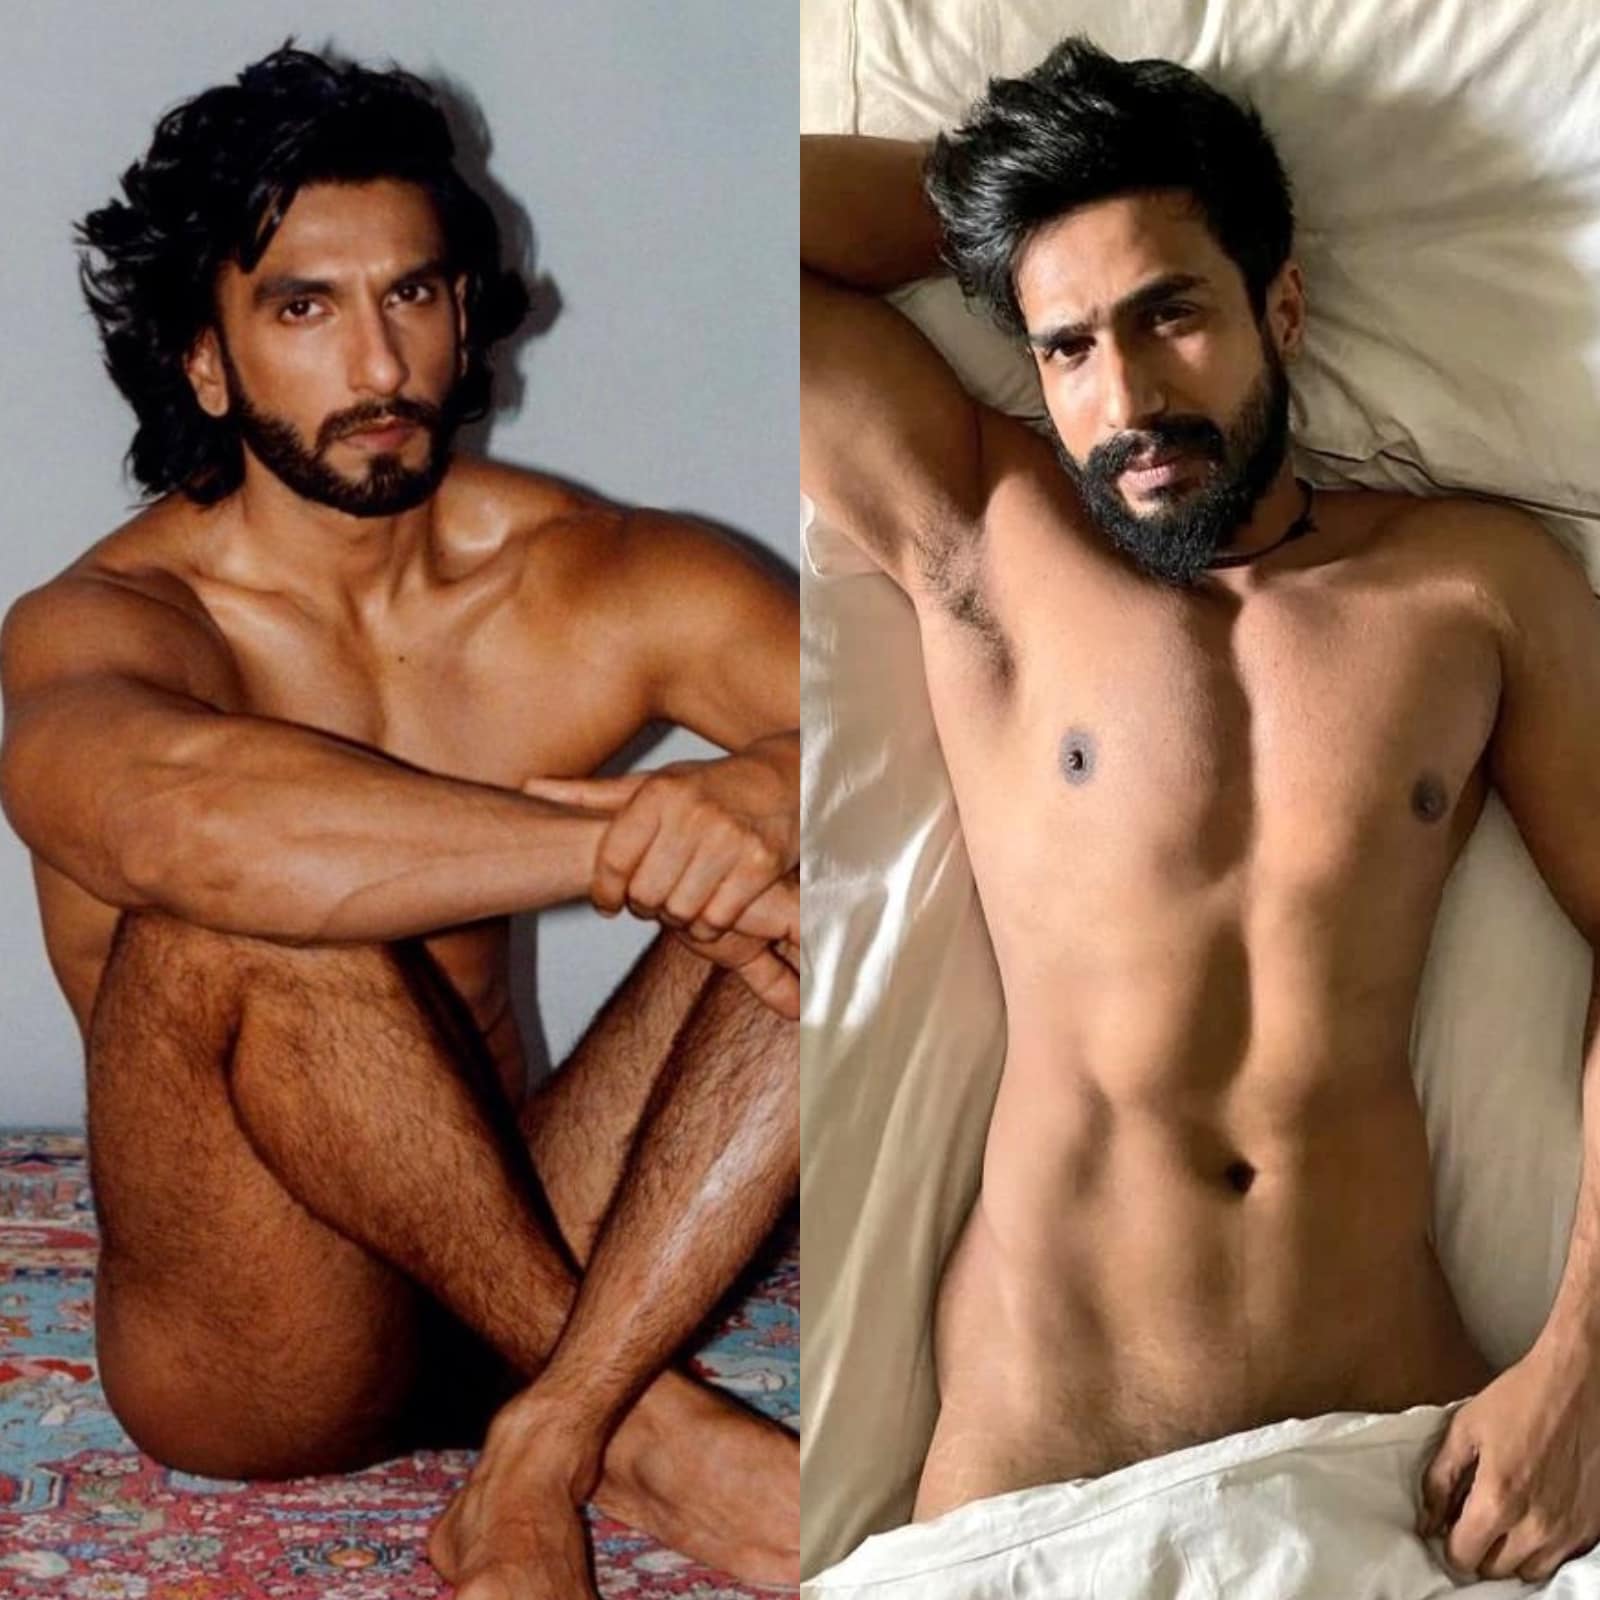 Prabhas Nude Photos - After Ranveer Singh, Vishnu Vishal Drops 'Almost' Nude Pics To Join The  Trend